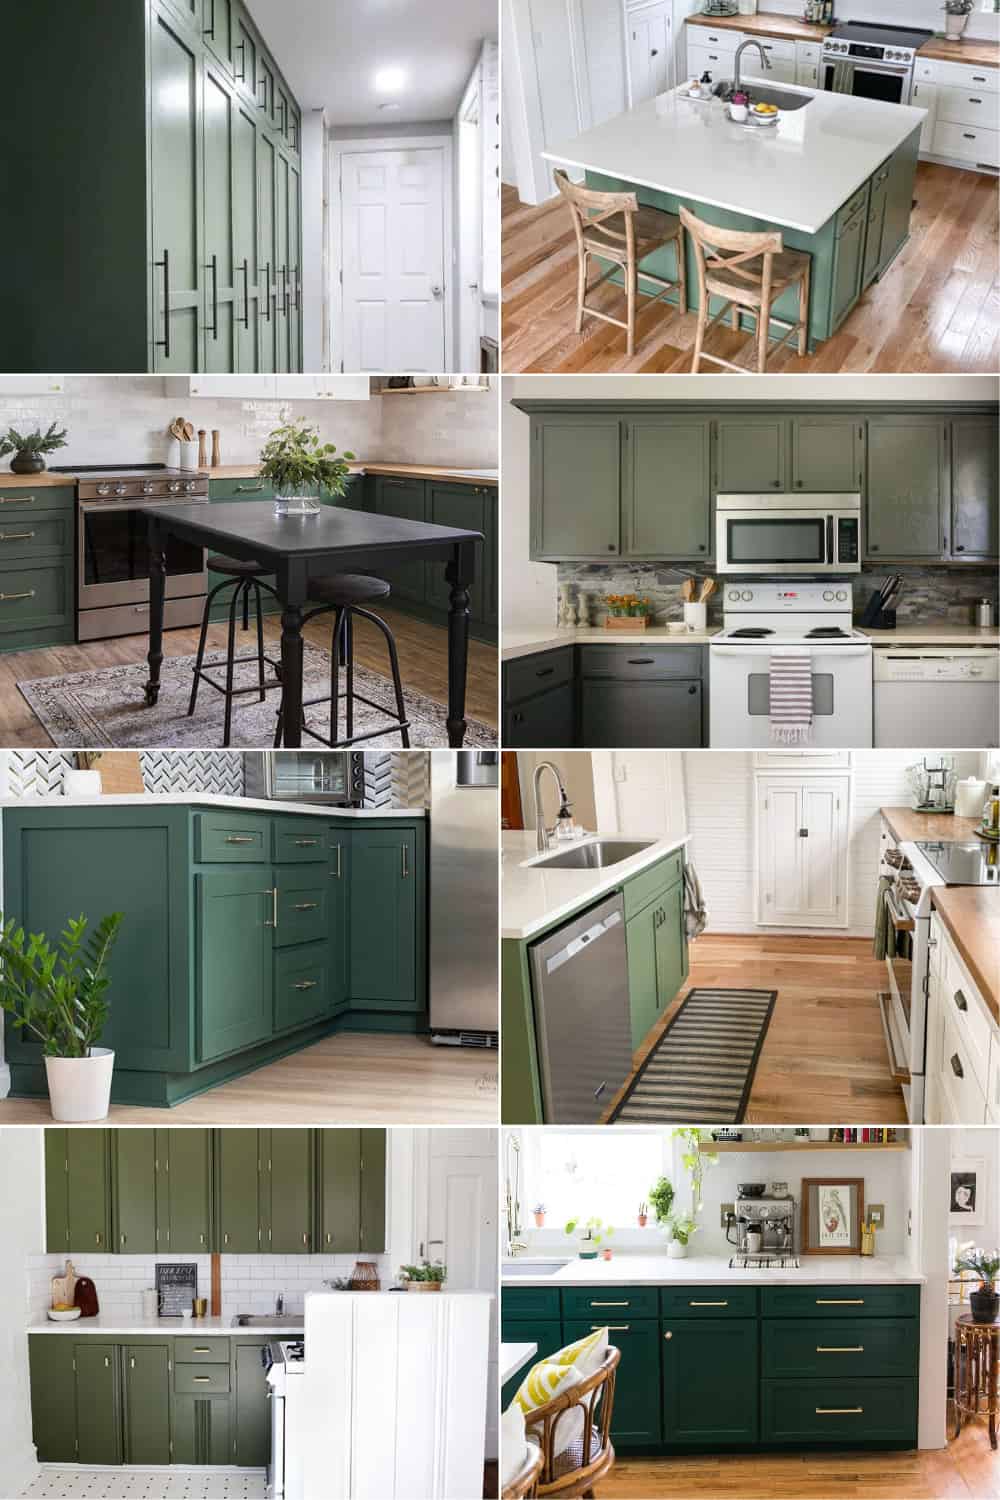 10 Beautiful Kitchens with Green Walls  Green kitchen walls, Green kitchen  decor, Green kitchen cabinets